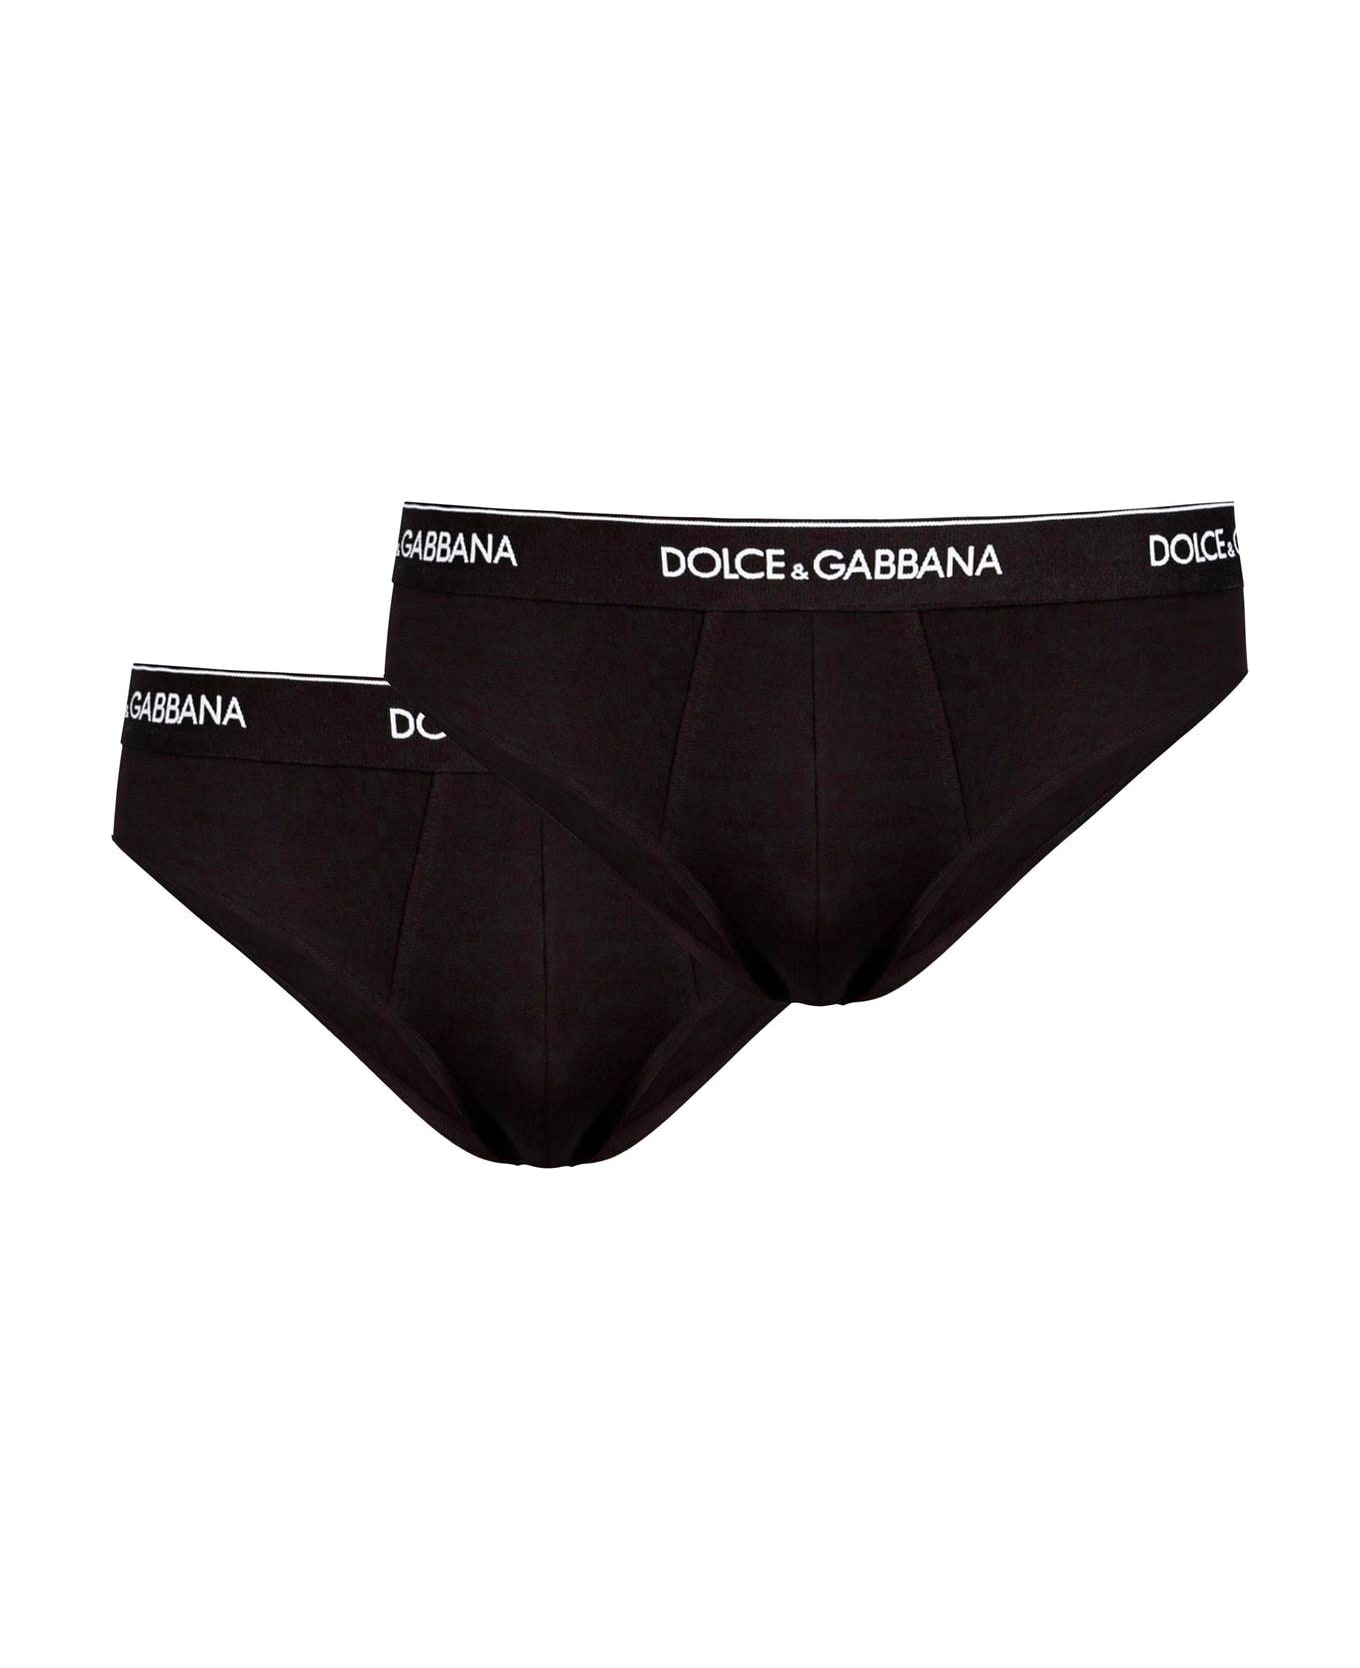 Dolce & Gabbana Cotton Briefs With Logoed Elastic Band - Black